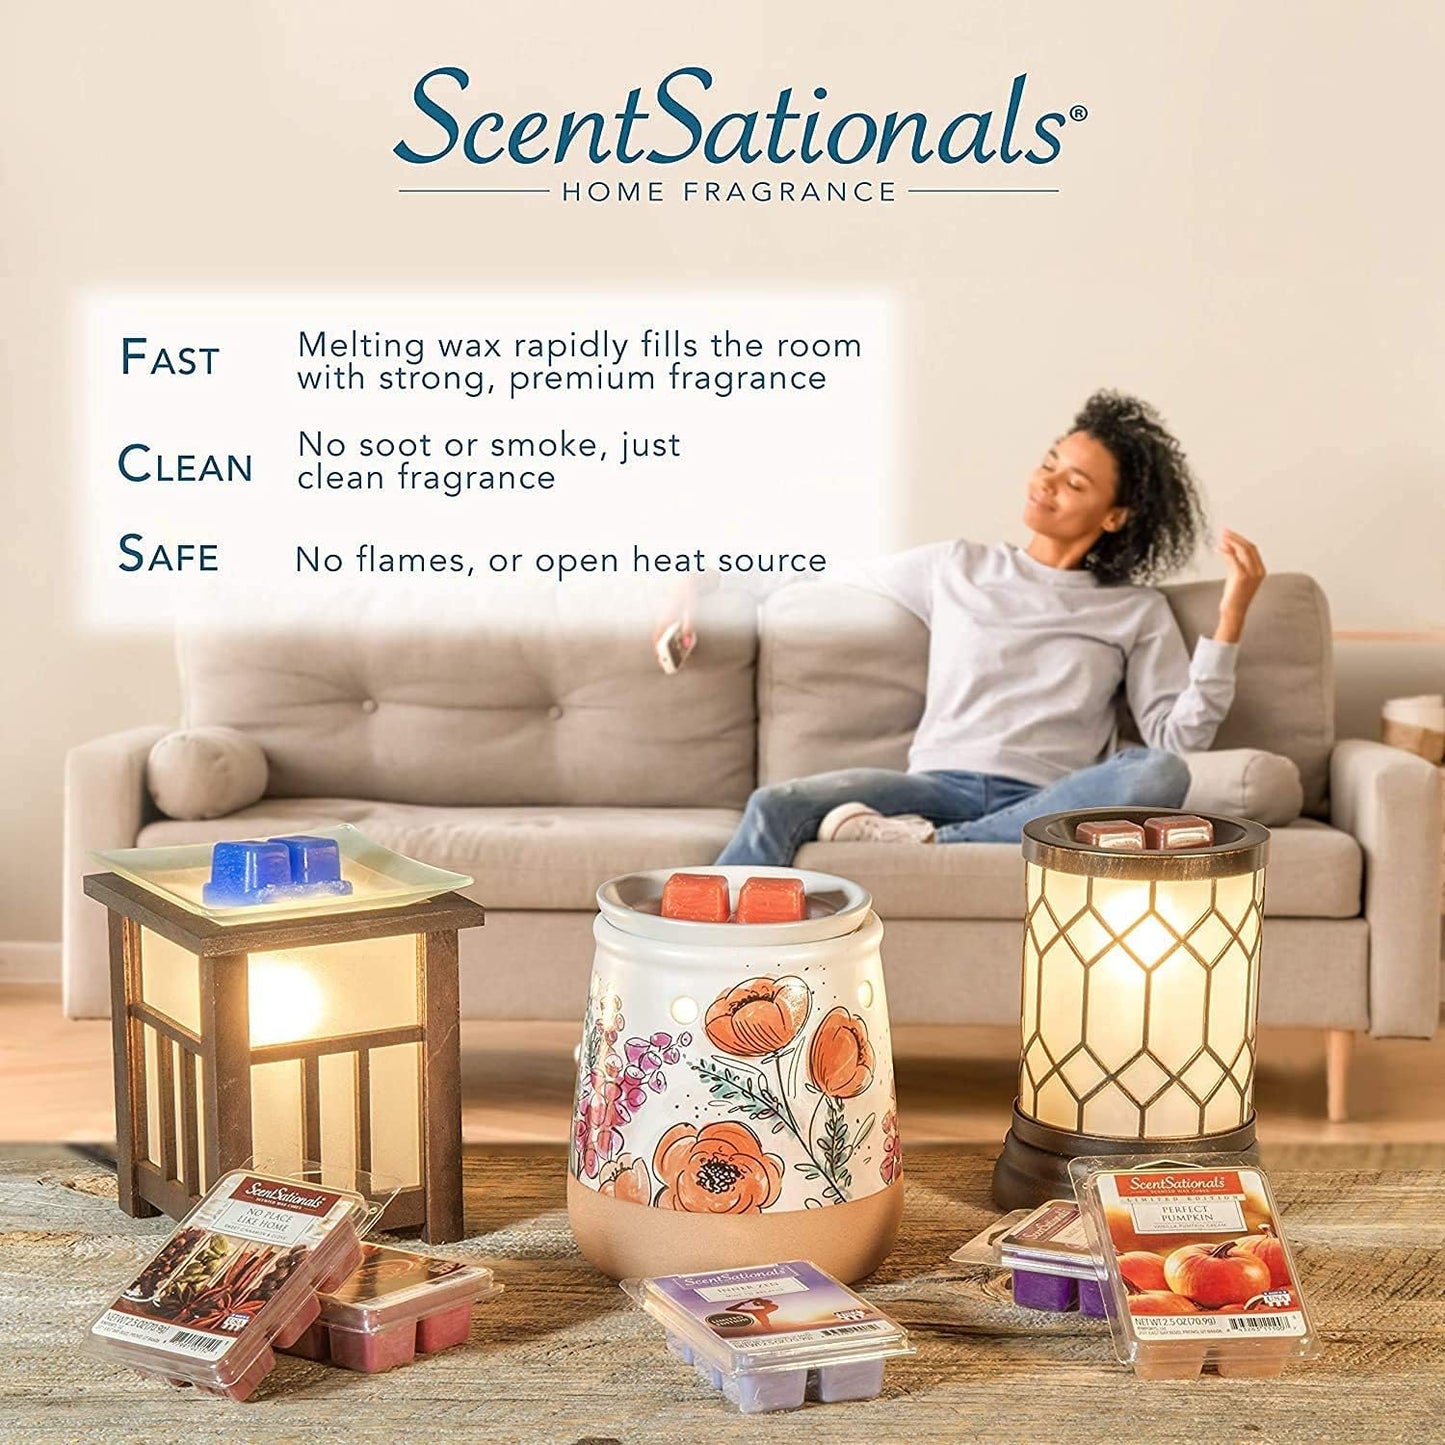 Scentsationals Mid Sized Wax Warmer, Scented Wax Cube Melter- Electric Fragrance Burner - Wickless Candle Air Freshener, Home Décor, House Decoration Gift Sock Monkey